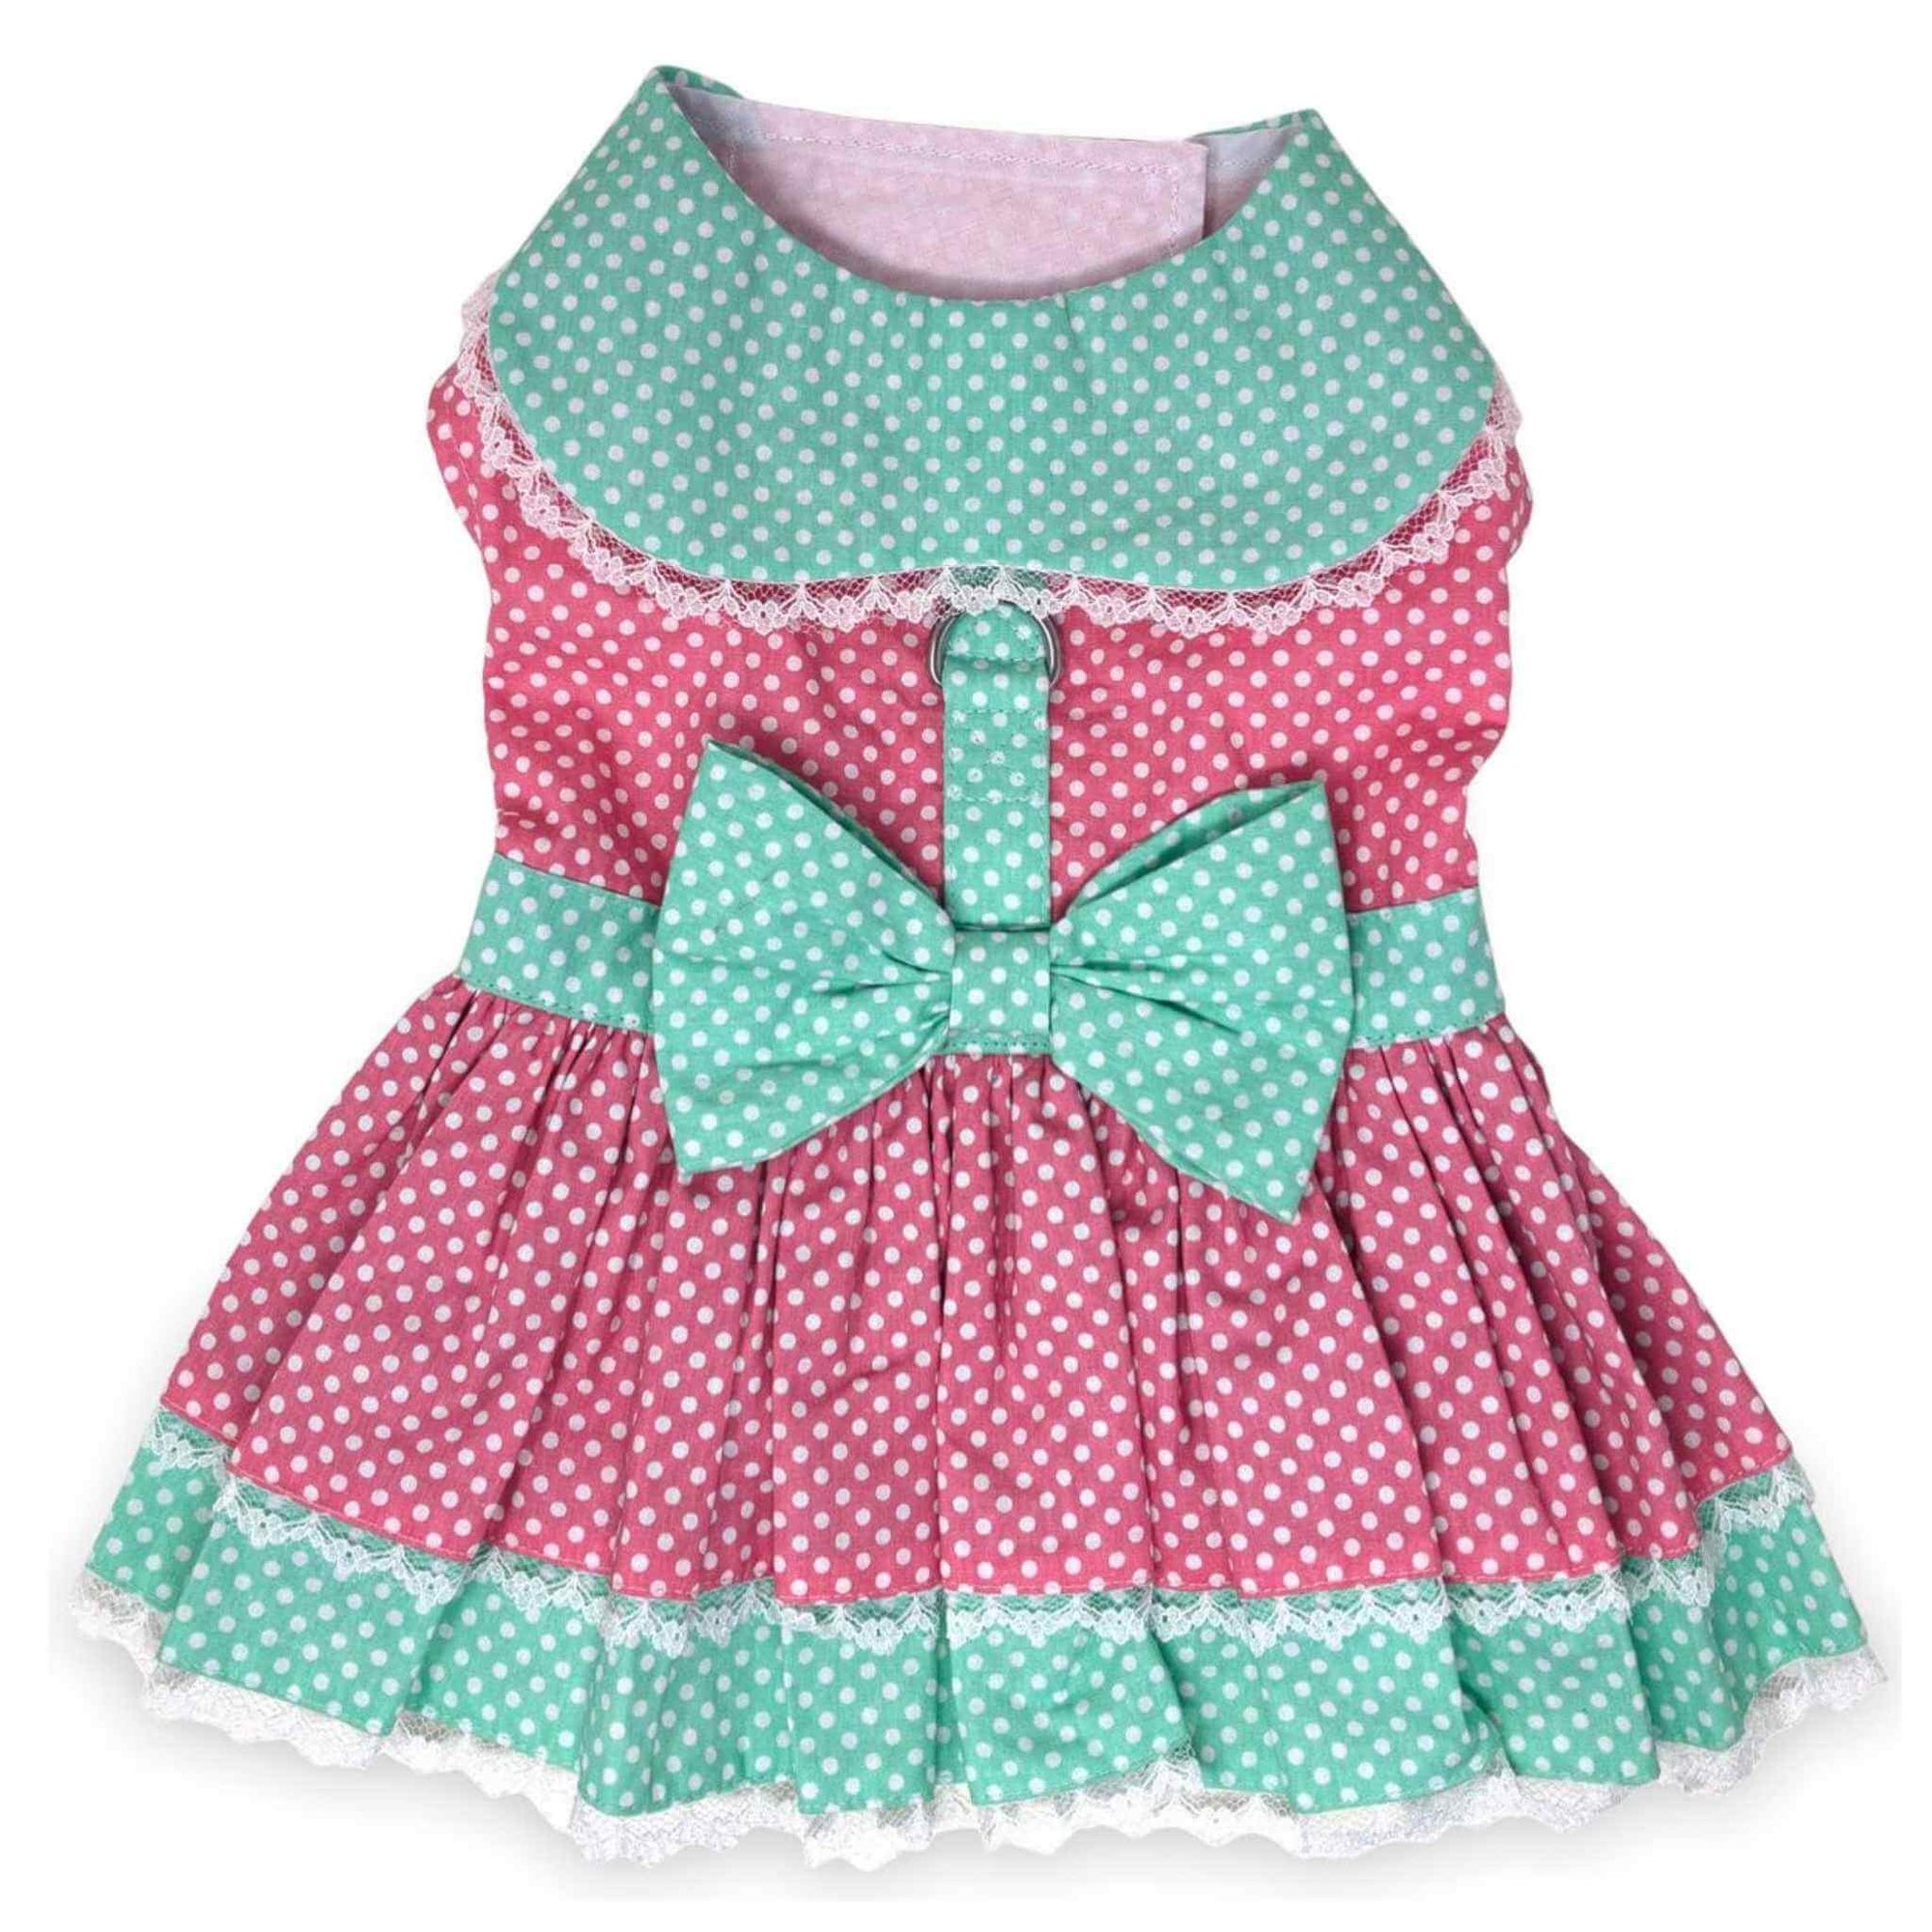 Pink & Teal Polka Dot Lace Dog Dress with Matching Leash